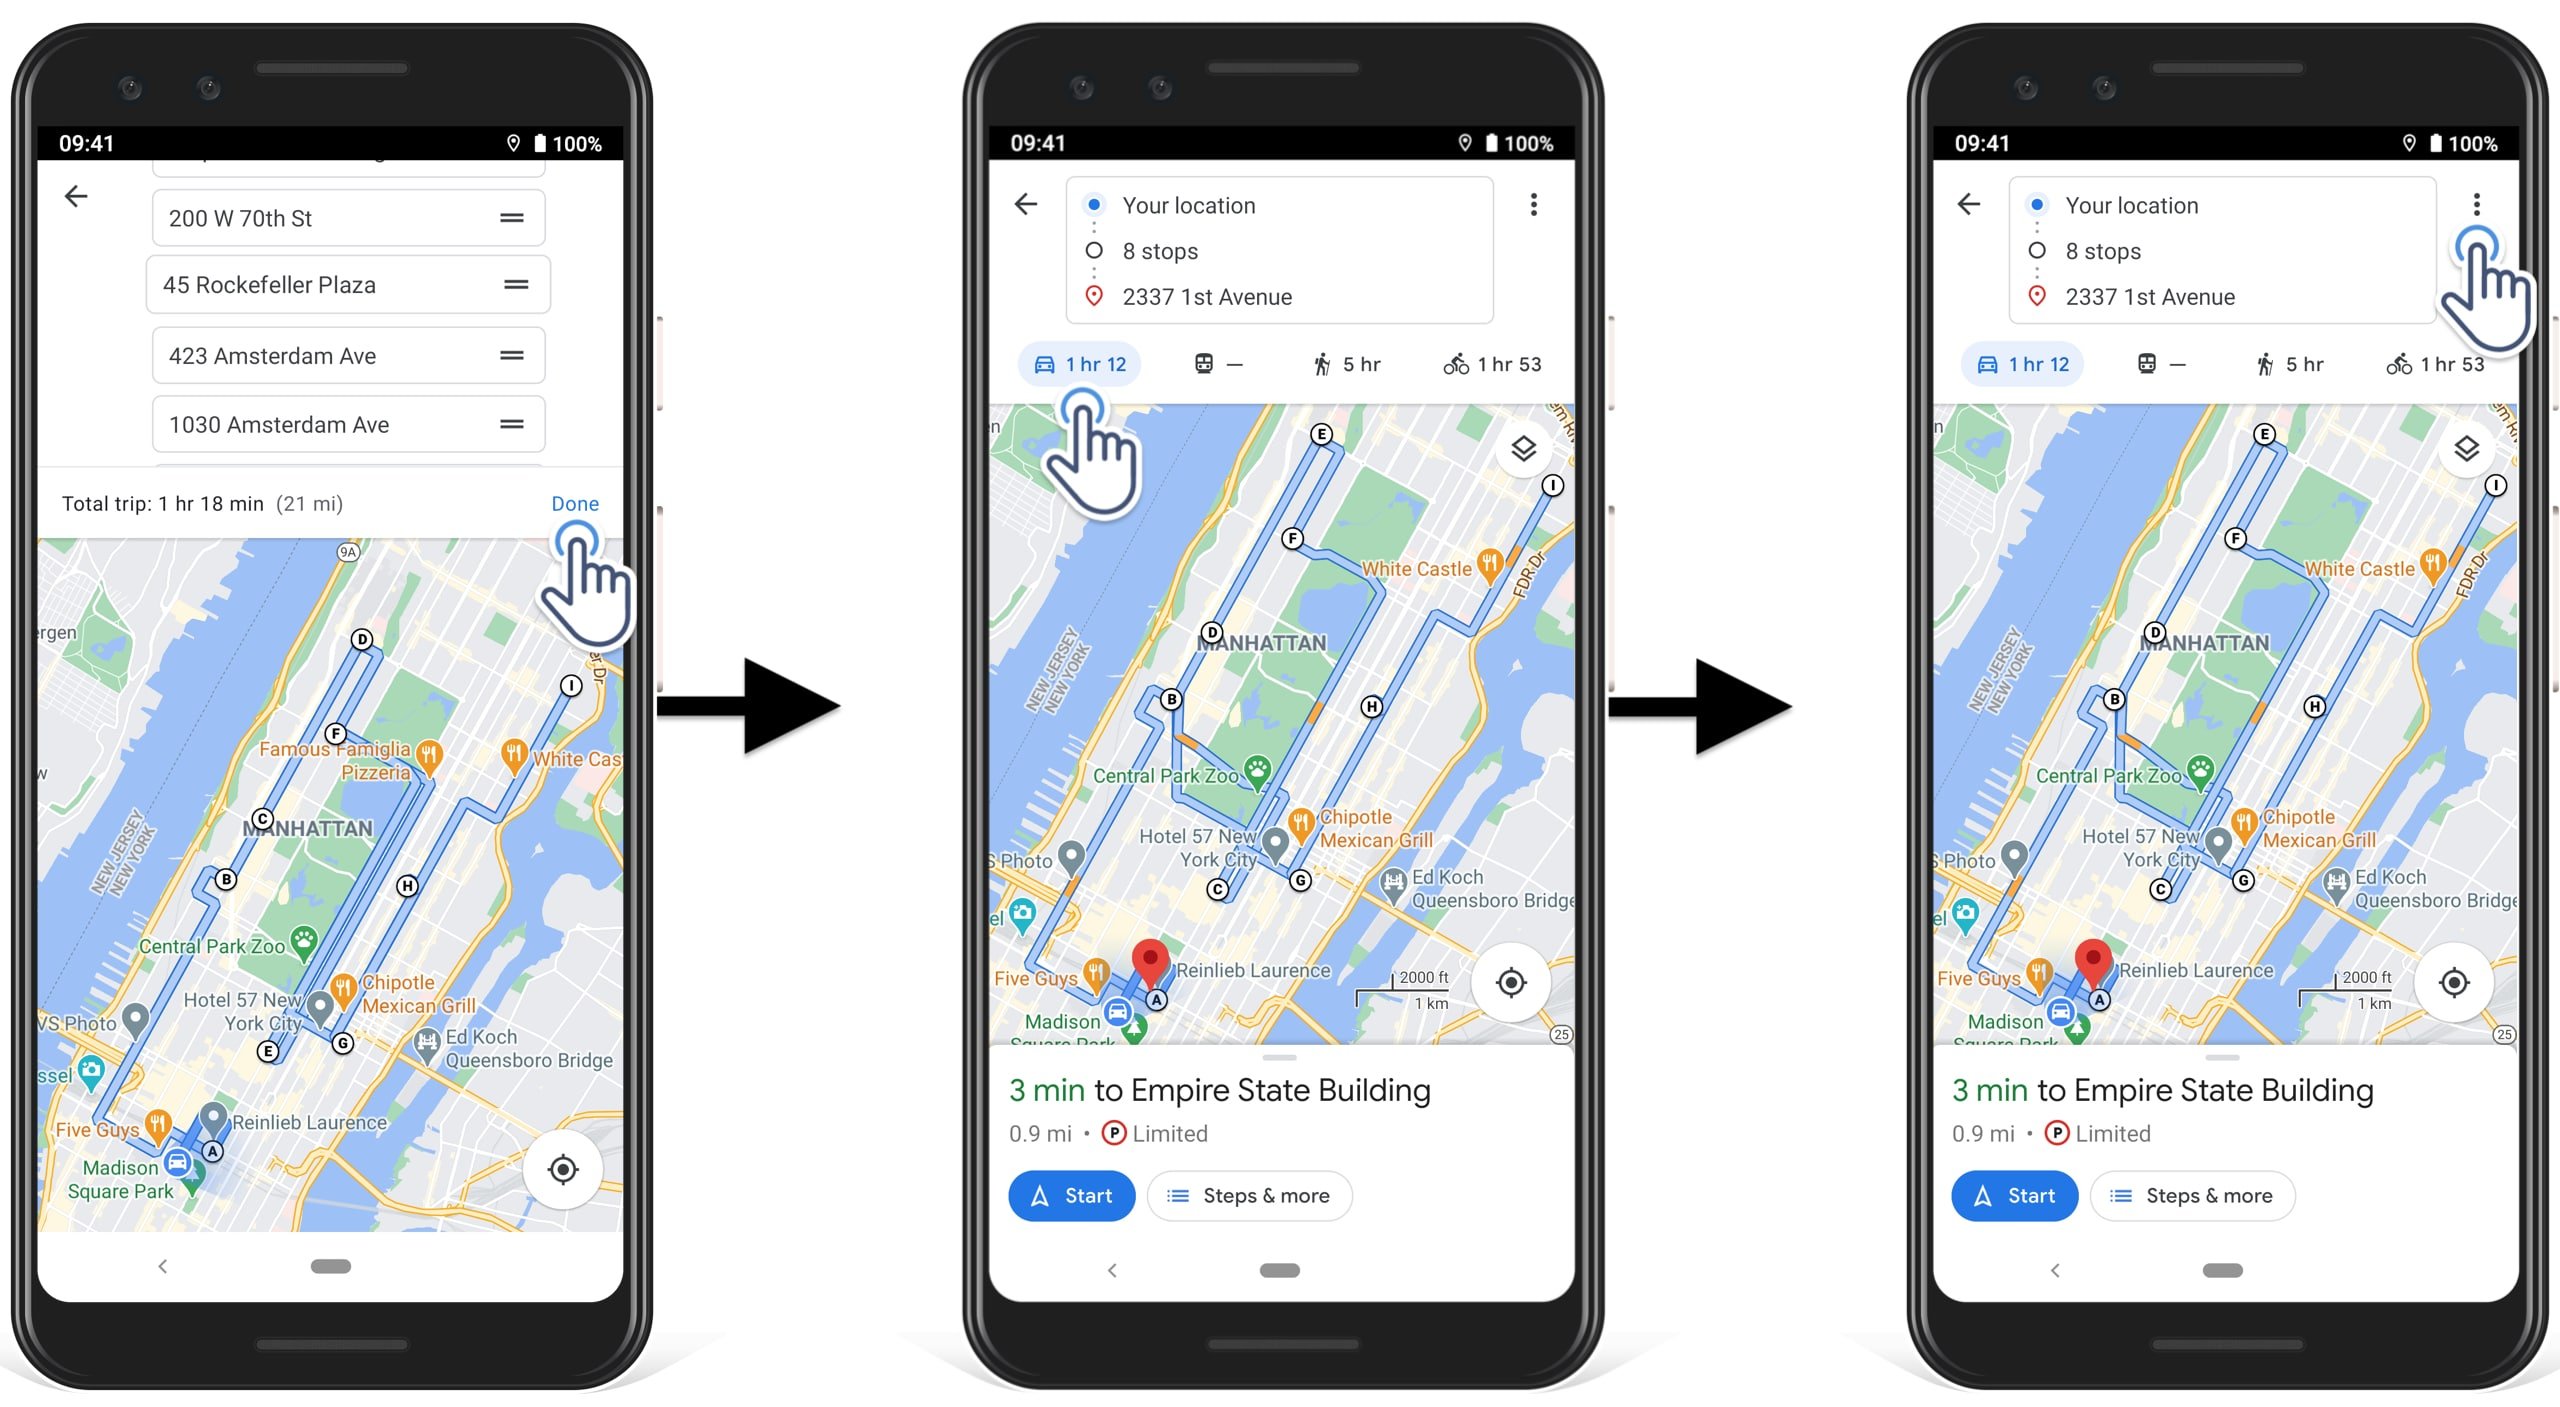 Getting driving directions to navigate a multi stop route on the Google Maps route planner for multiple stops